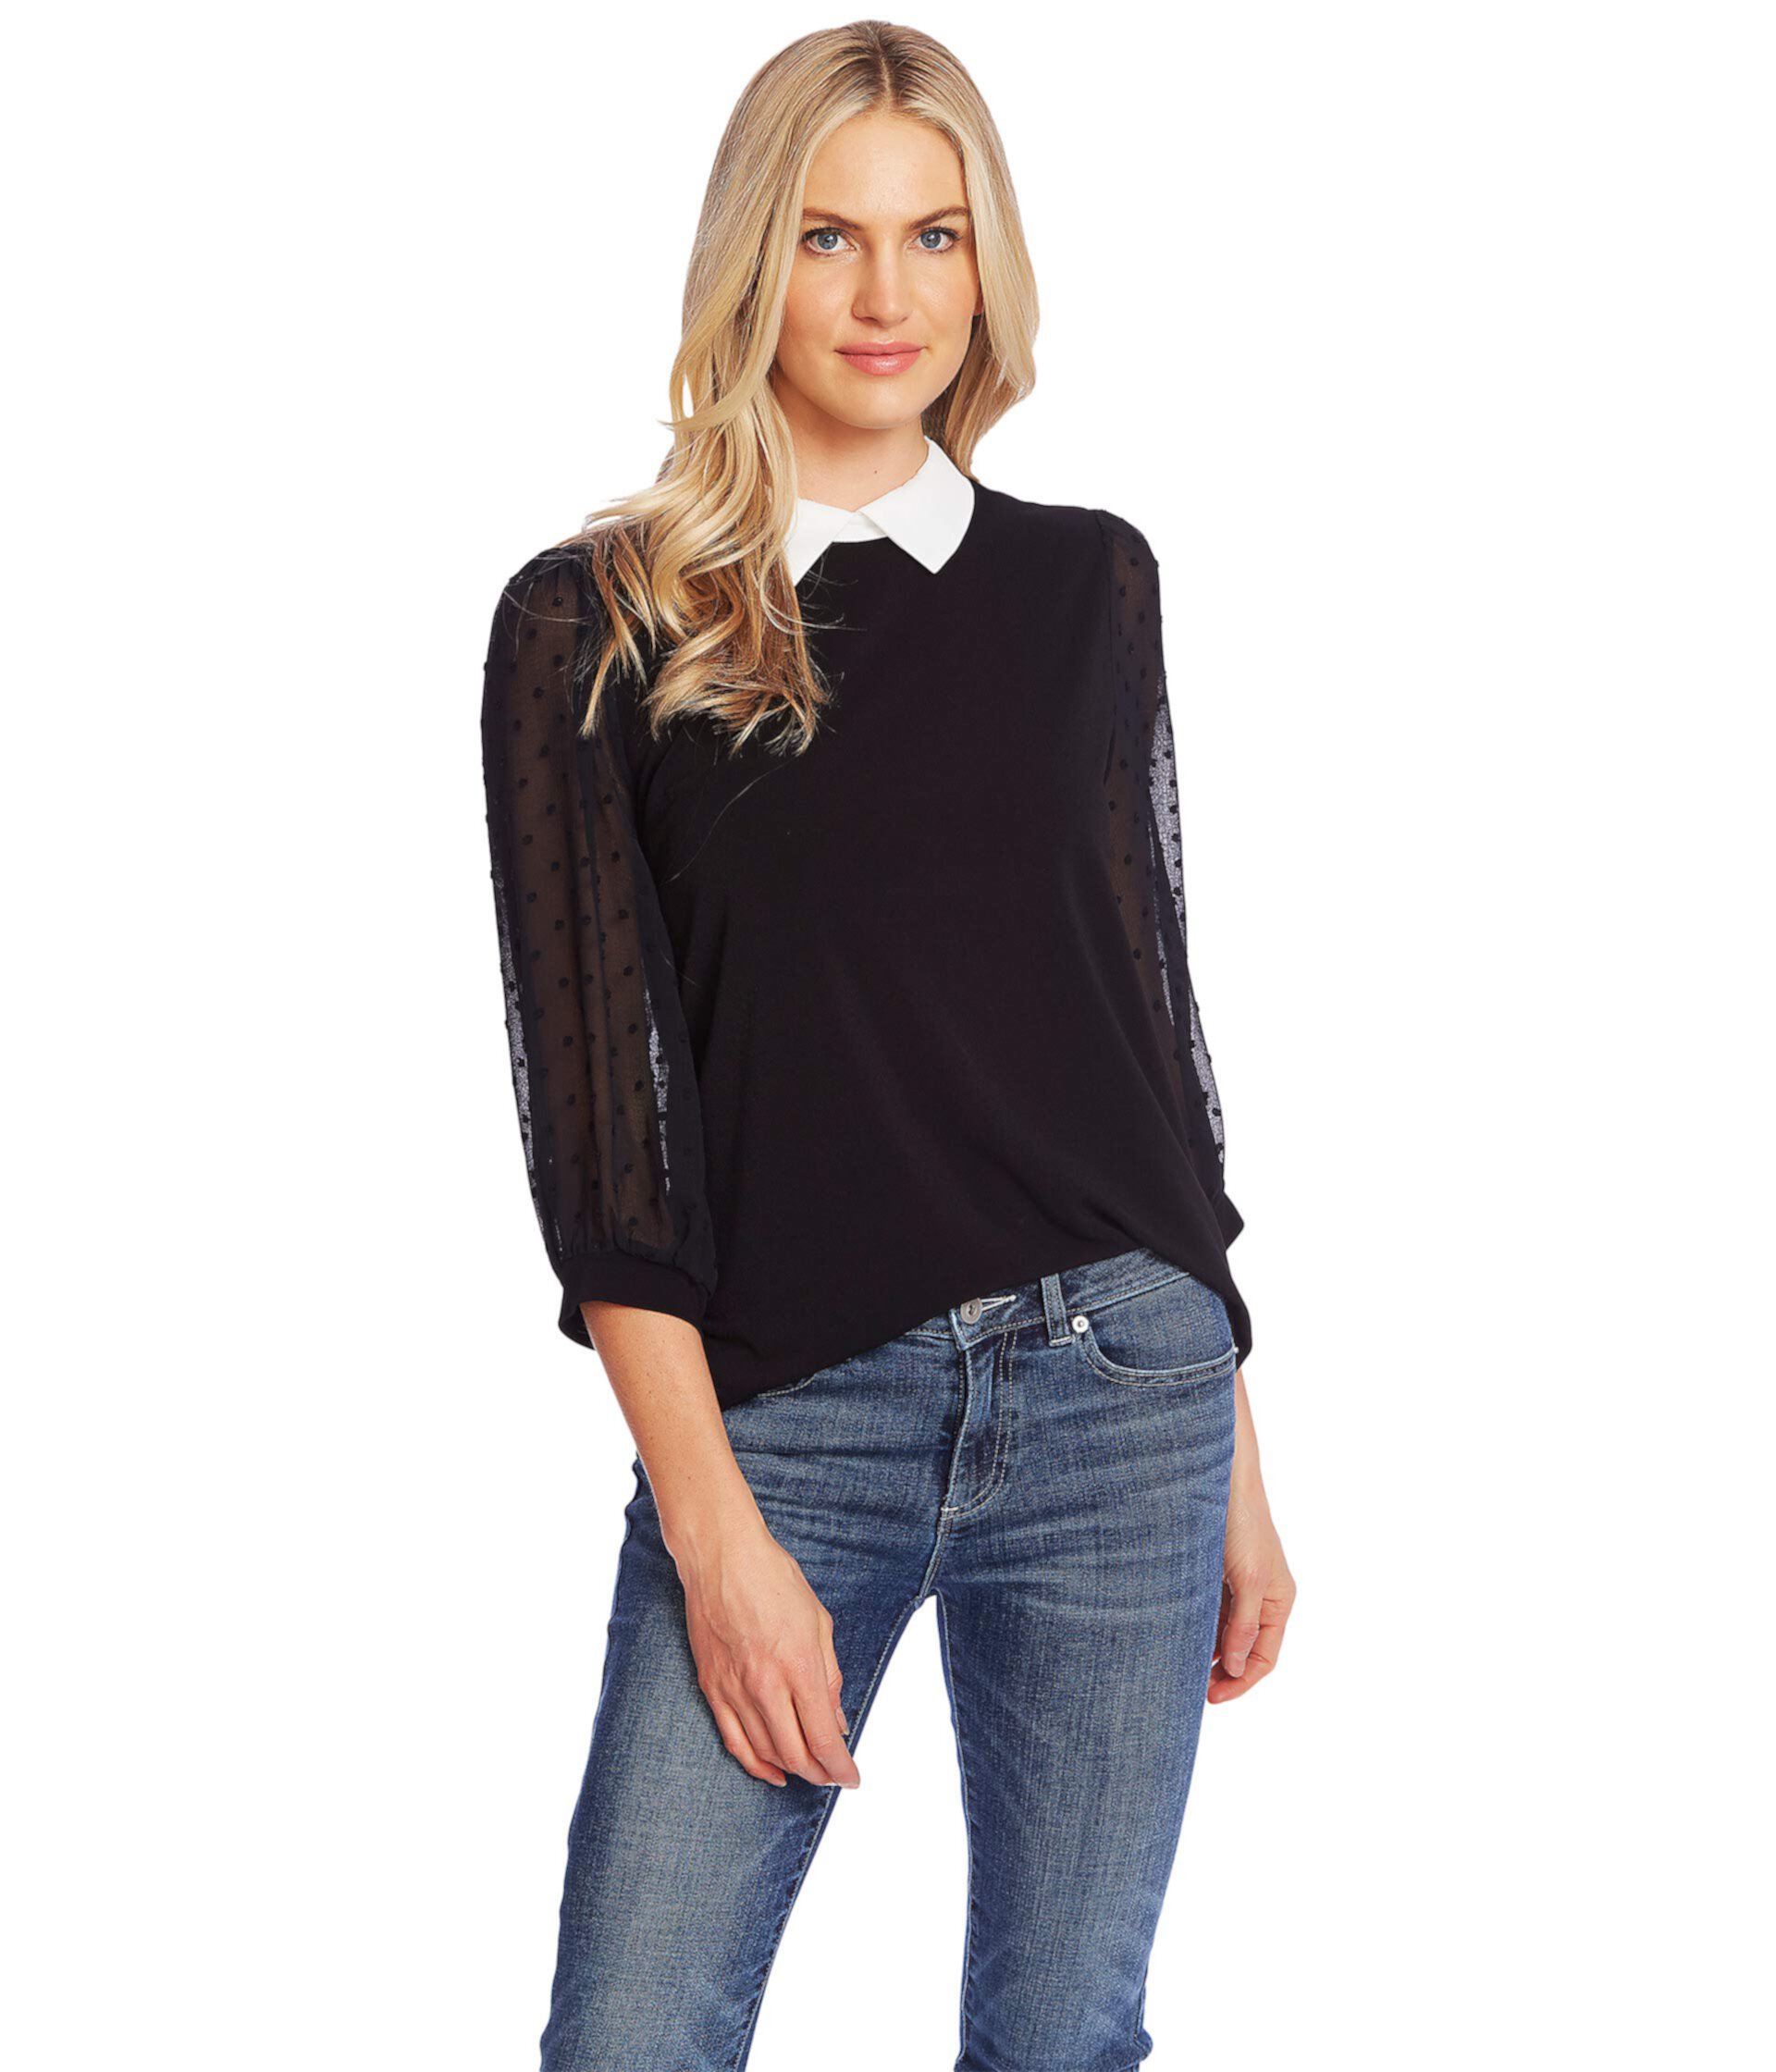 Long Sleeve Collared Knit Top with Clip Dot Sleeves CeCe